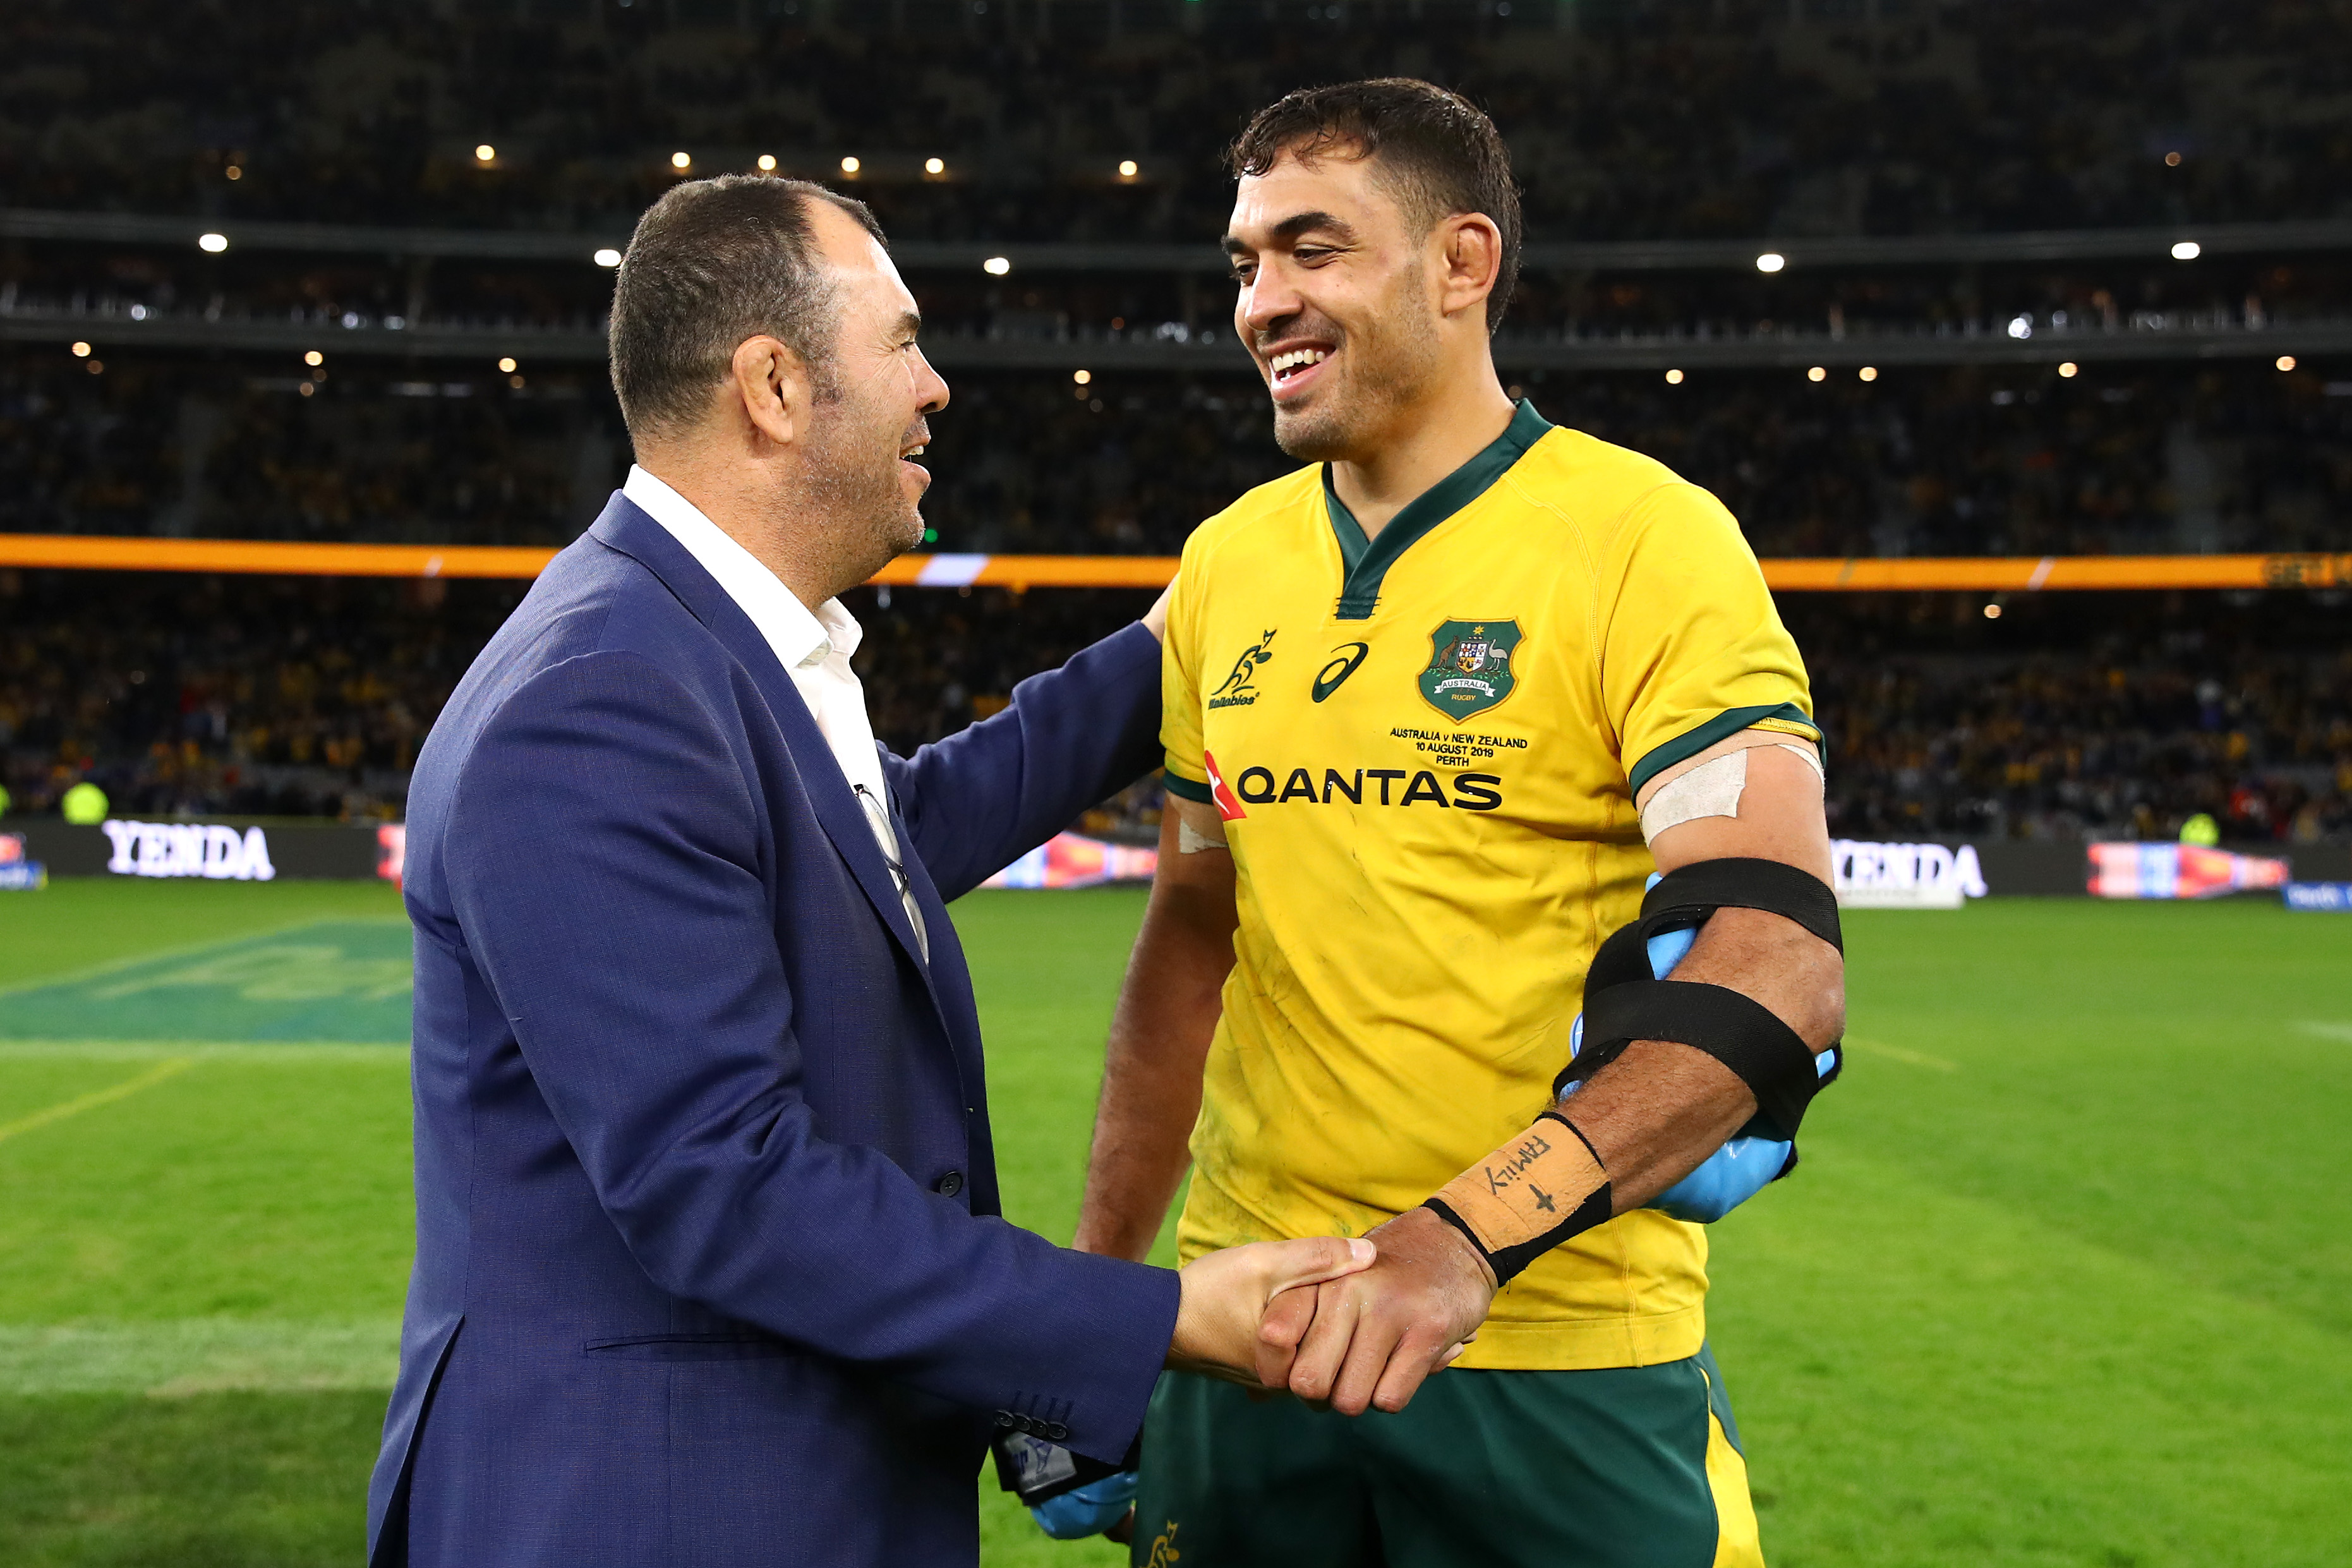 Rory Arnold and Michael Cheika embrace after beating the All Blacks at Optus Stadium.